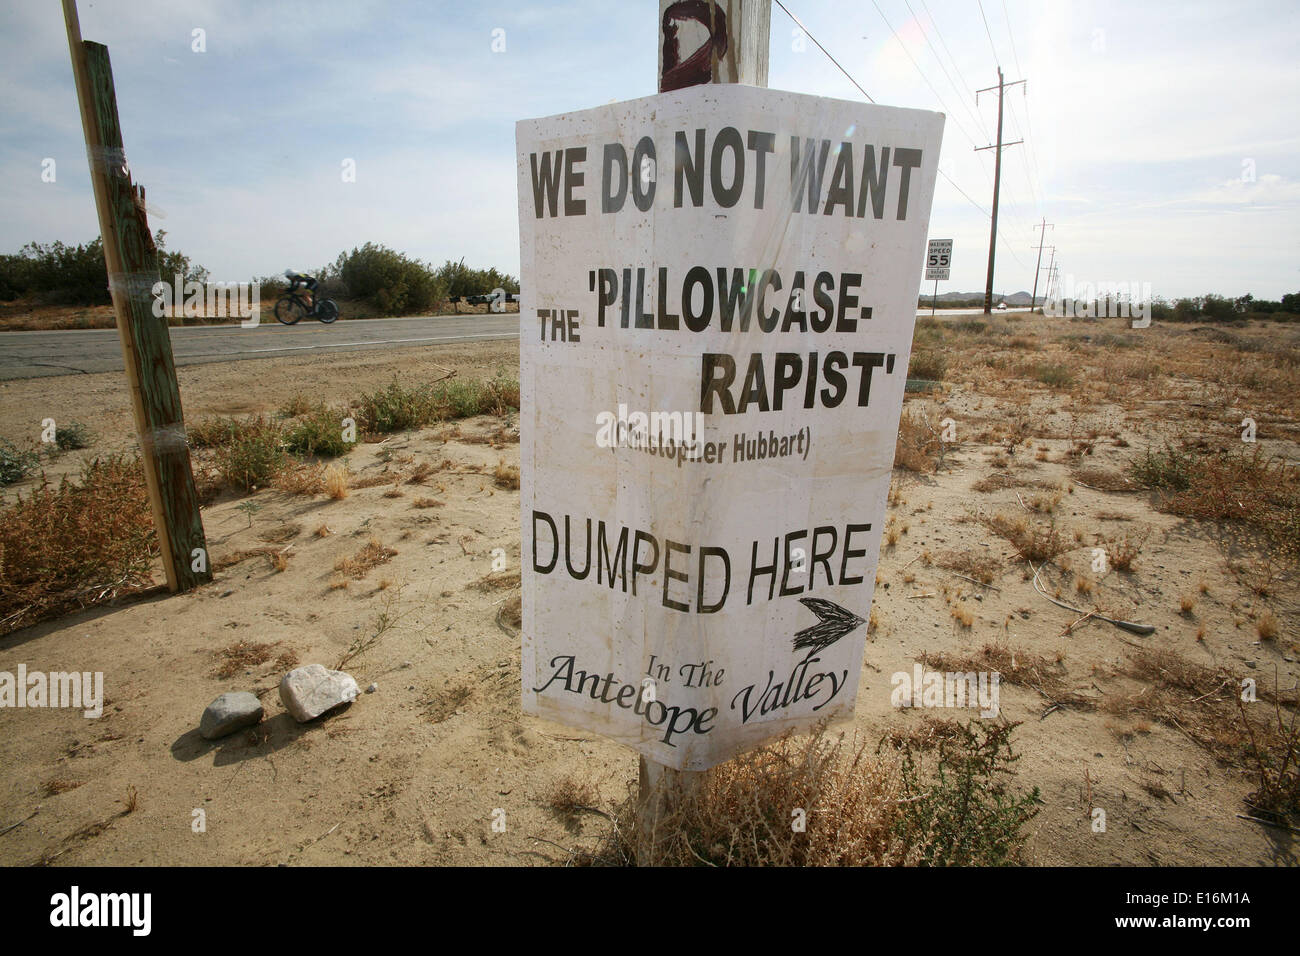 Ontario, CA, USA. 24th May, 2014. A sign that reads 'We do not want the 'Pillowcase Rapist (Christopher Hubbart) dumped here in the Antelope Valley' is pictured near Palmdale, California. Known as the 'Pillowcase Rapist' Christopher Evans Hubbart, 63, admitted to raping about 40 women between 1971 and 1982, 26 of which were in the Los Angeles area. Judge Gilbert Brown in Northern California said Hubbart is to be released on or before July 7th, 2014. Hubbart will reside at a home in the 2000 block of East Avenue R in Lake Los Angeles. © Krista Kennell/ZUMAPRESS.com/Alamy Live News Stock Photo